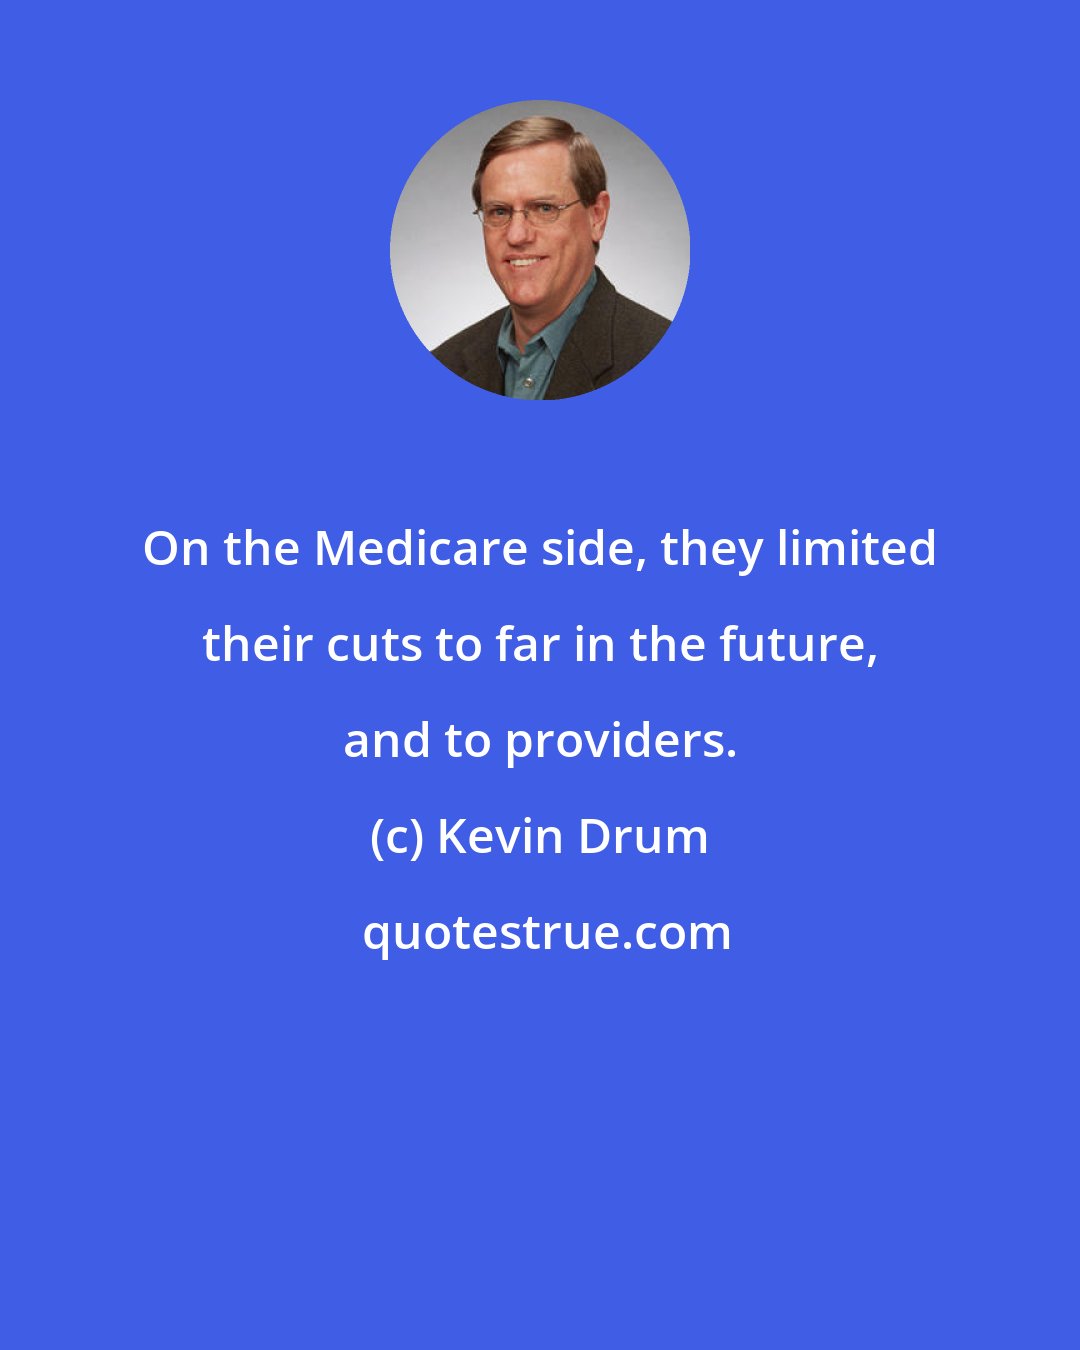 Kevin Drum: On the Medicare side, they limited their cuts to far in the future, and to providers.